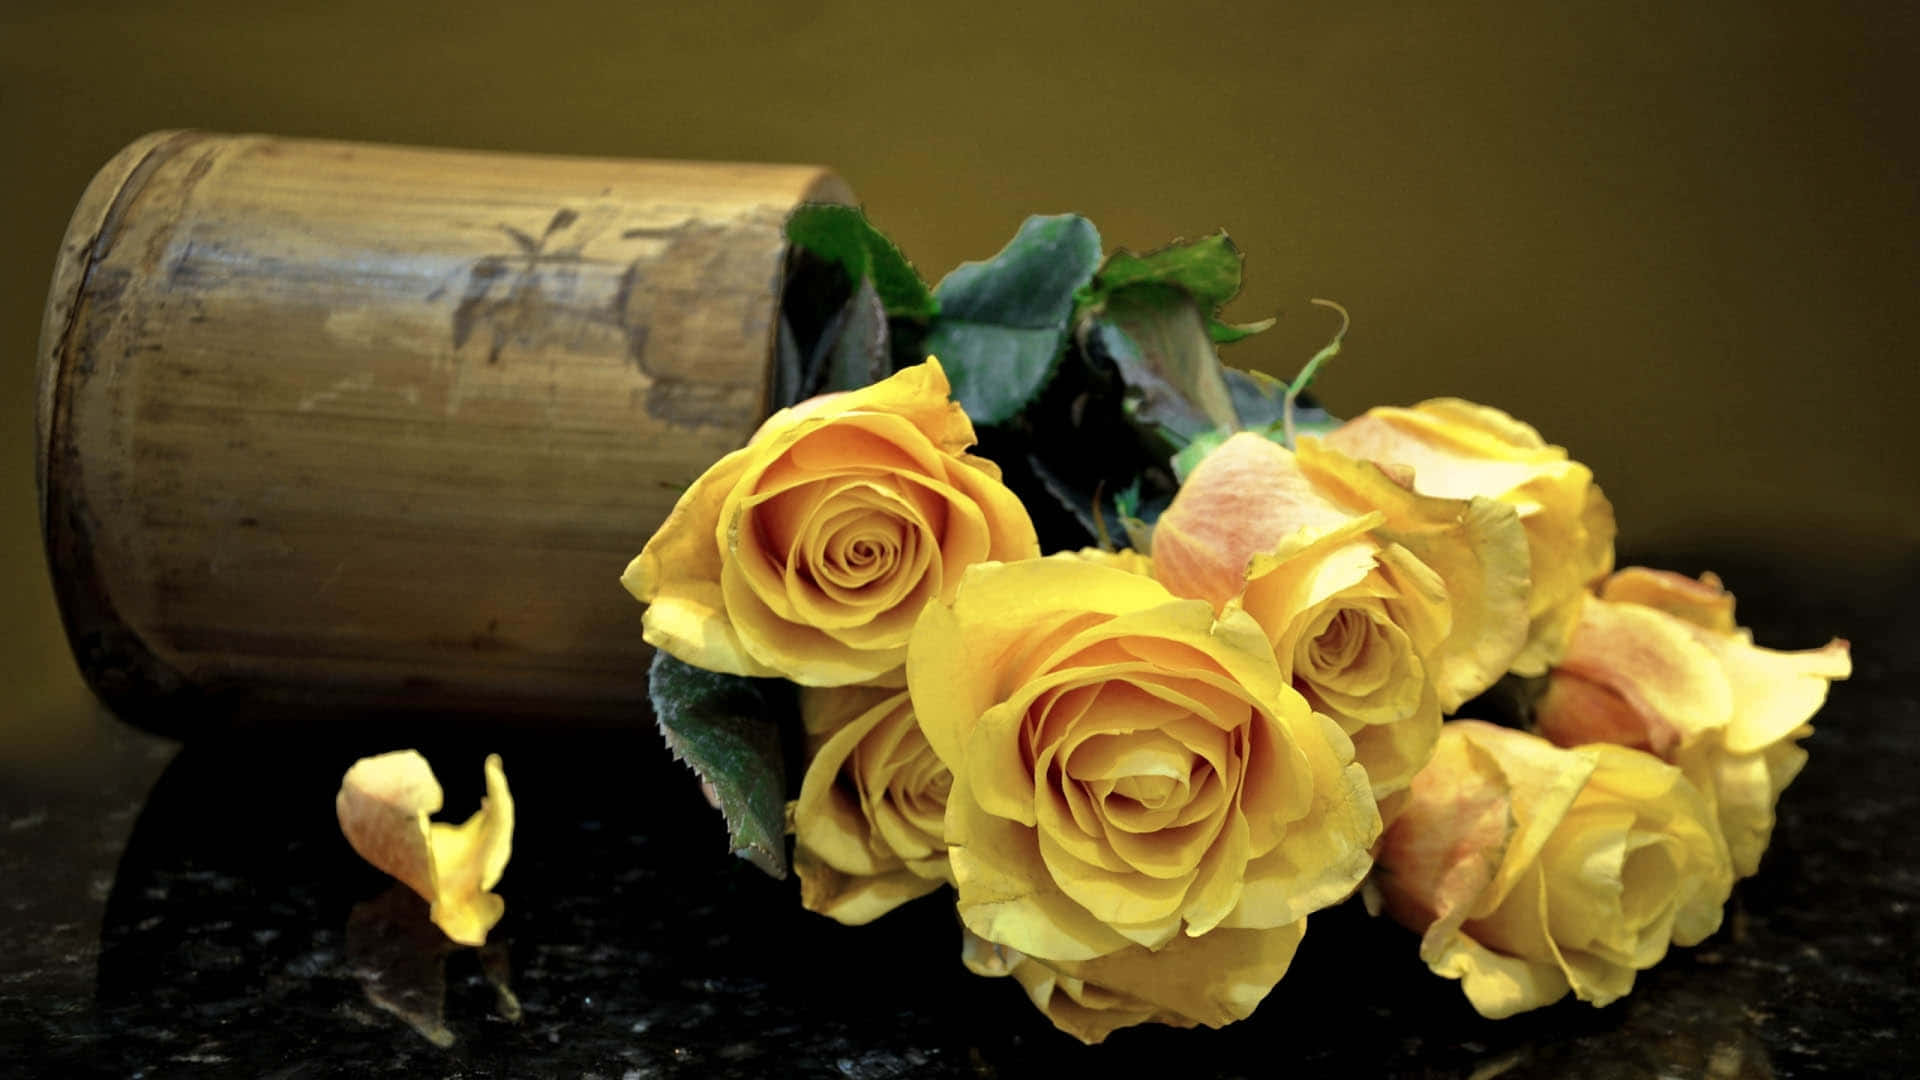 1440p Fallen Yellow Roses Background